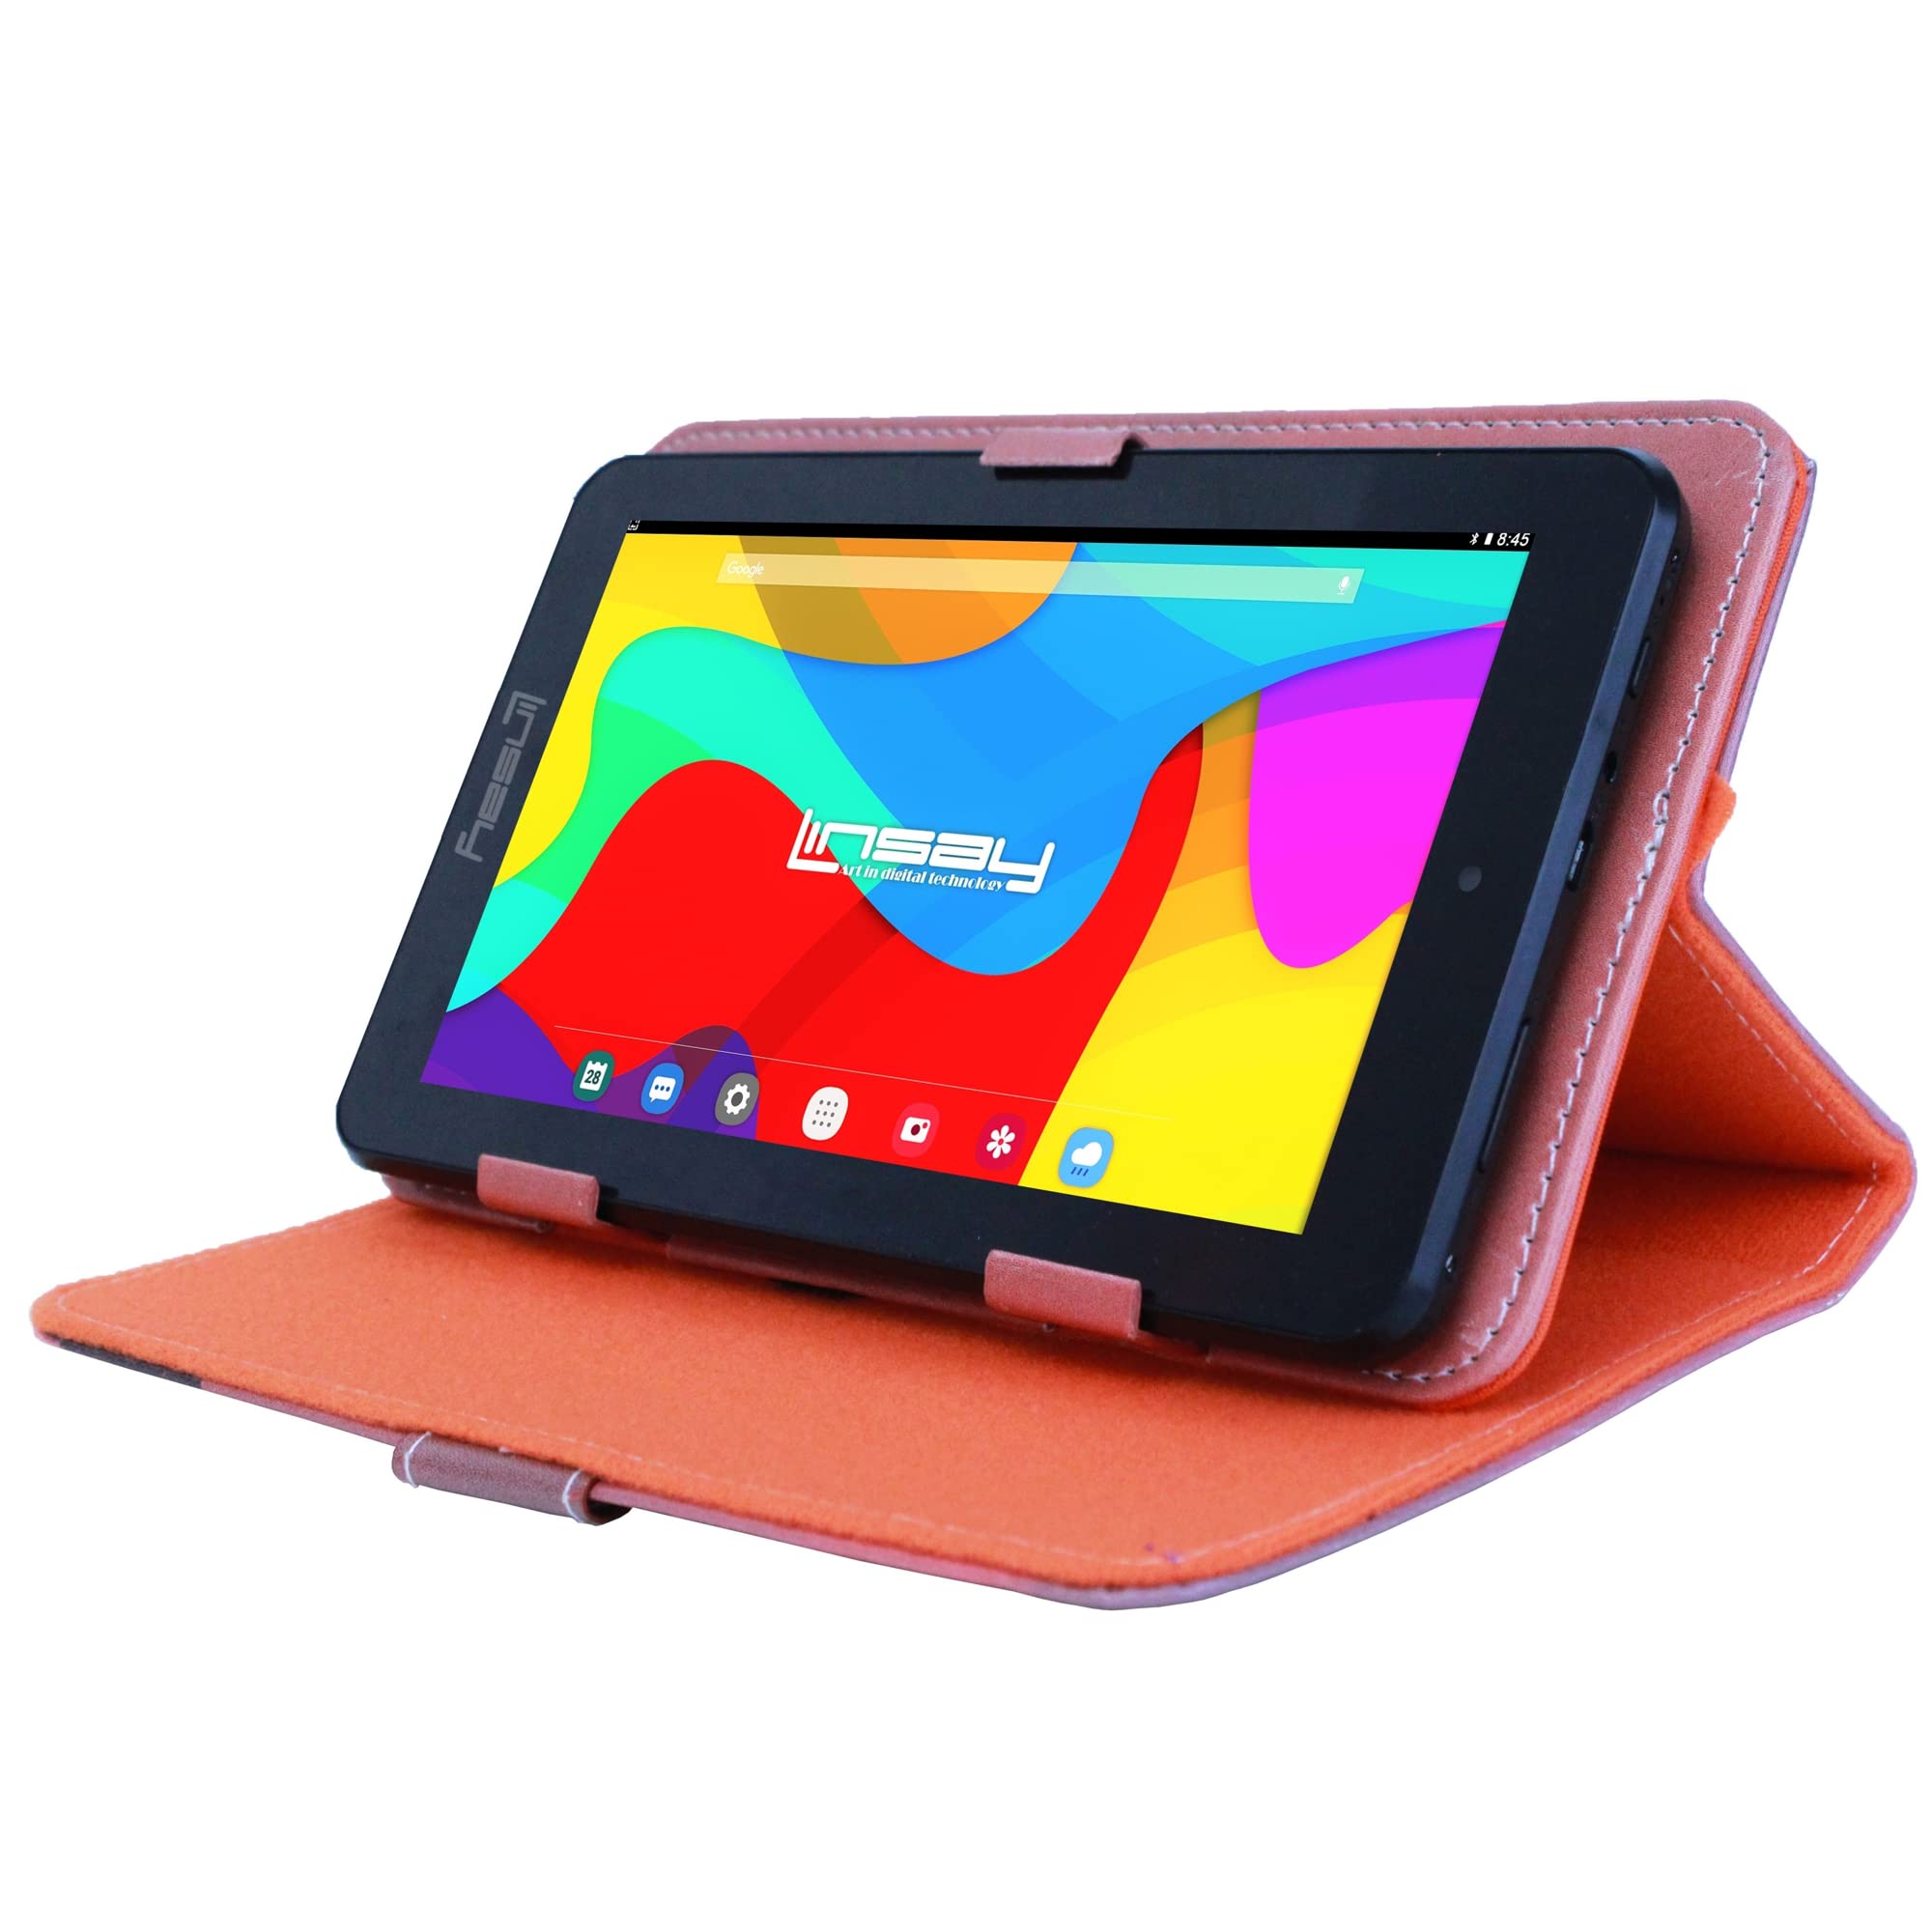 LINSAY 7" 2GB RAM 32GB Storage Android 12 Tablet with New York Style Leather Case, Pop Holder and Pen Stylus